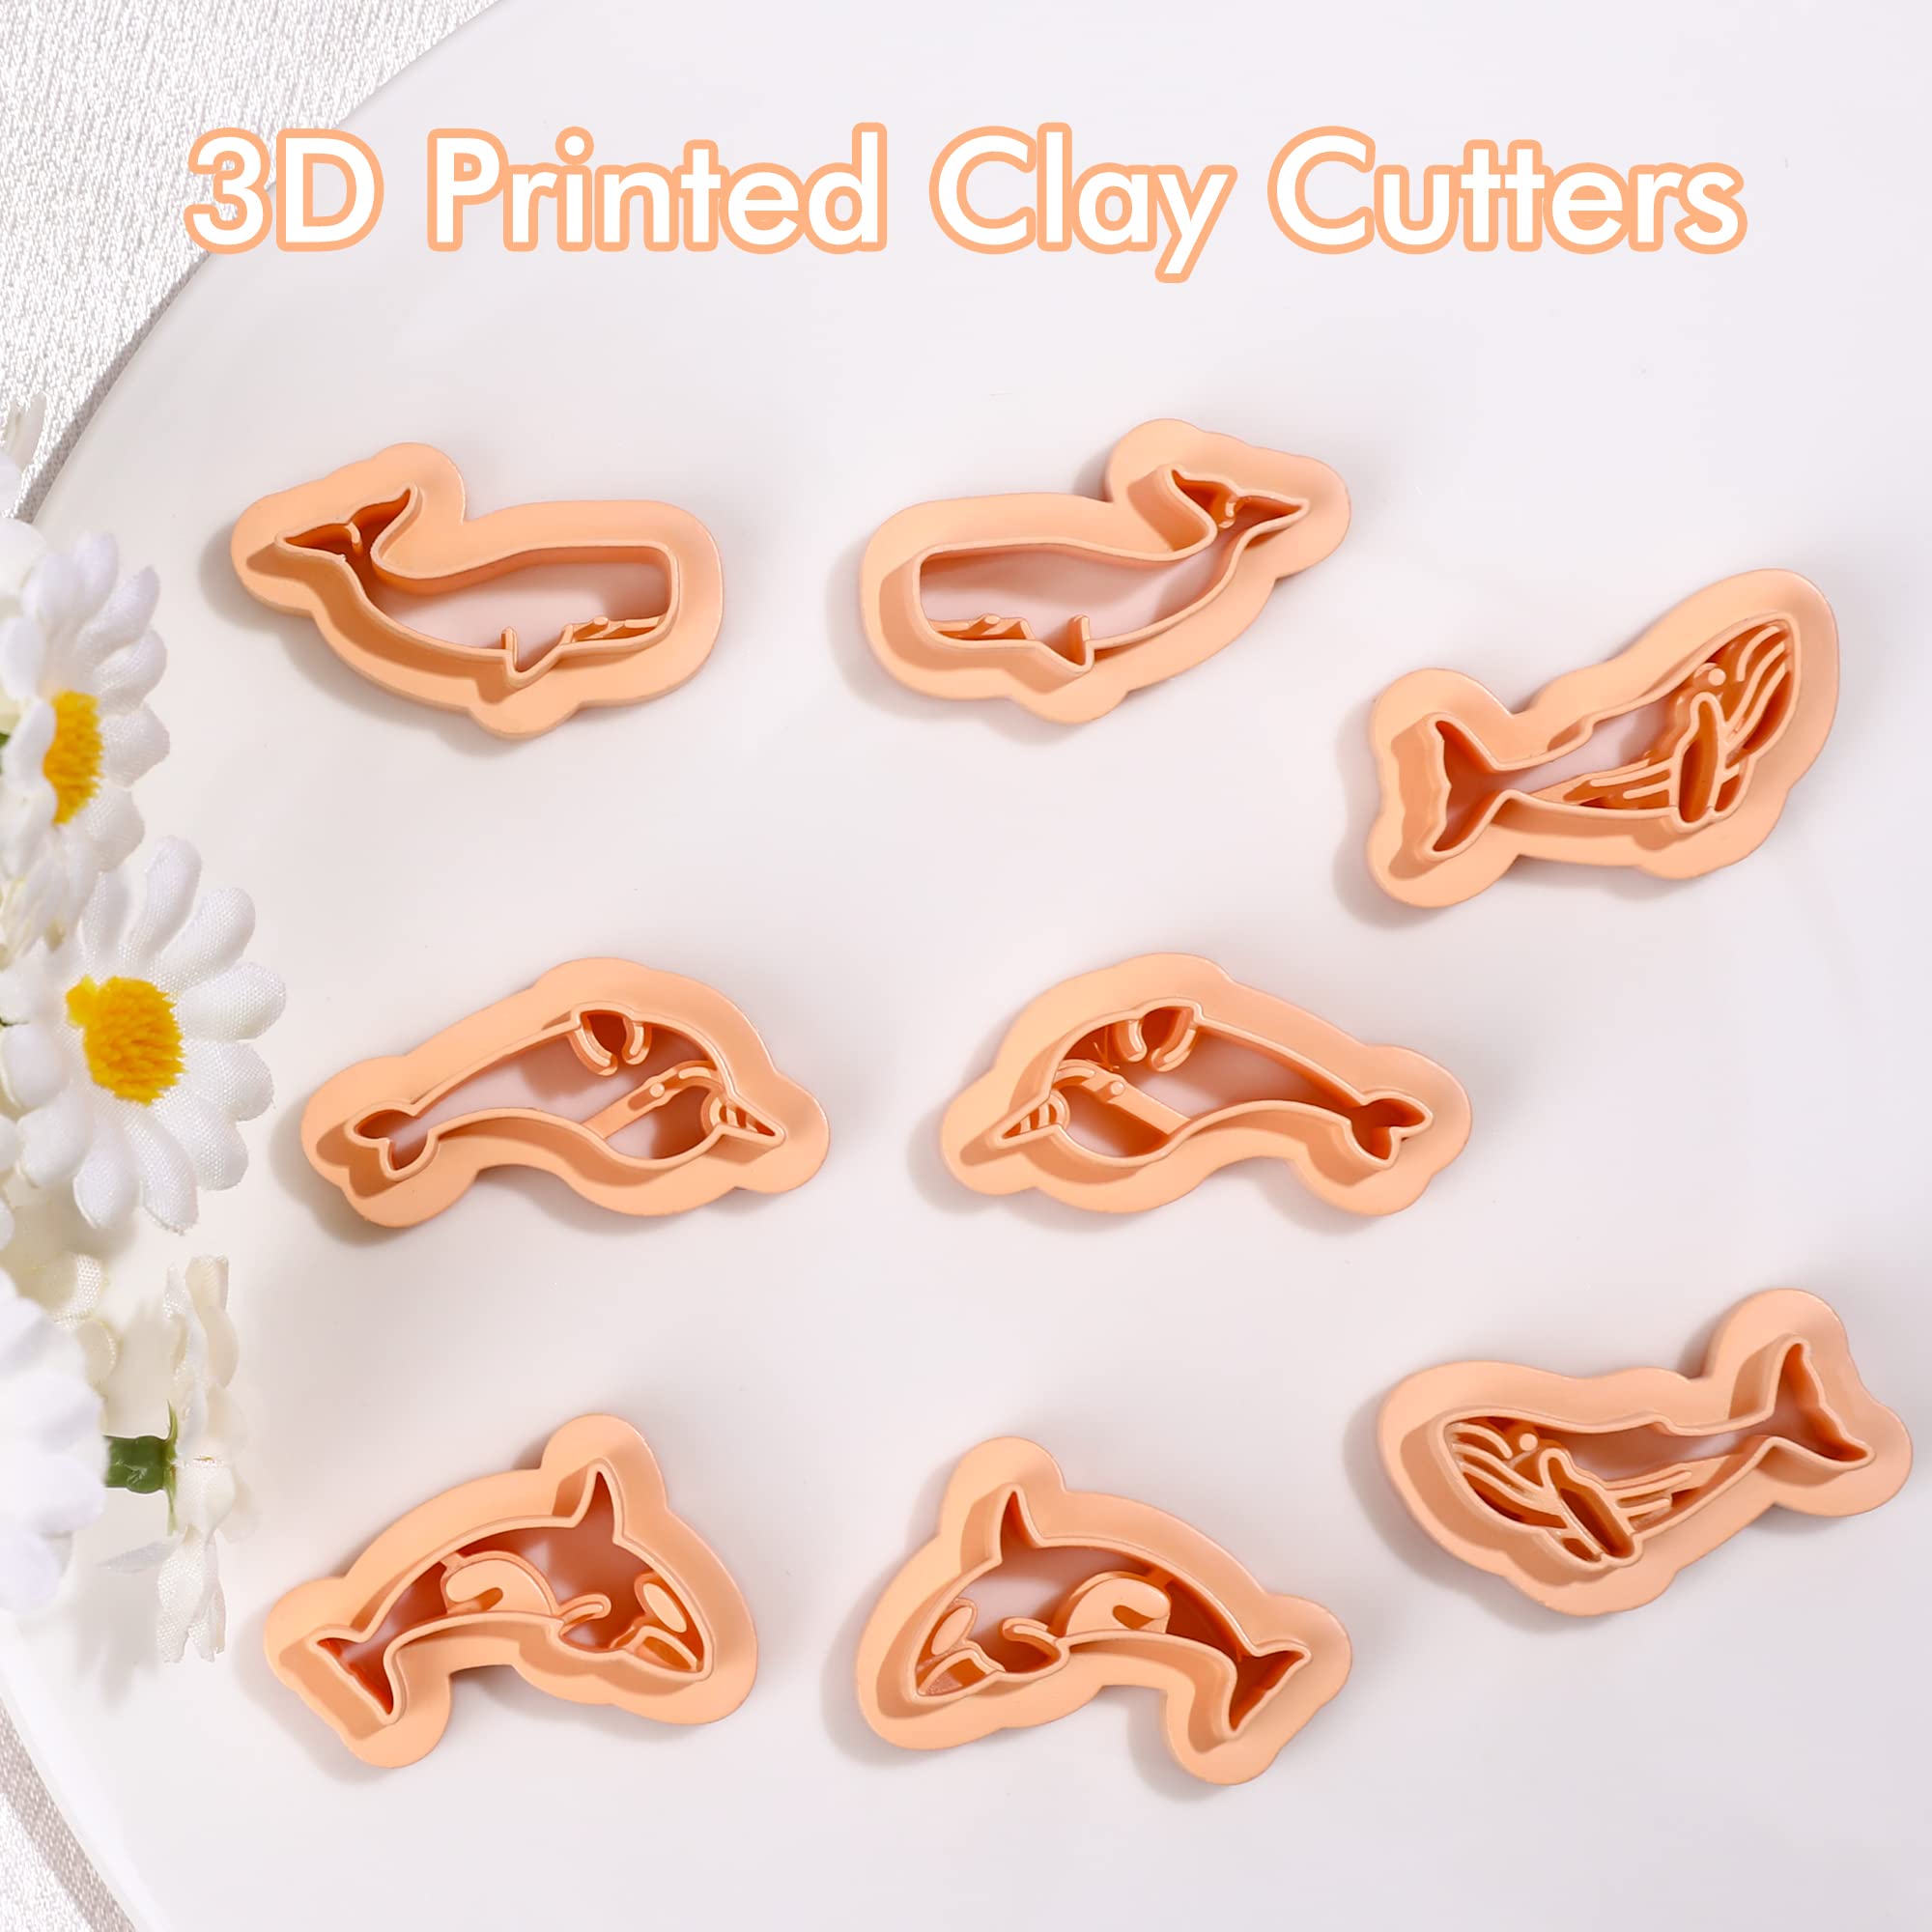 Puocaon Cowgirl Valentines Clay Cutters 12 Pcs